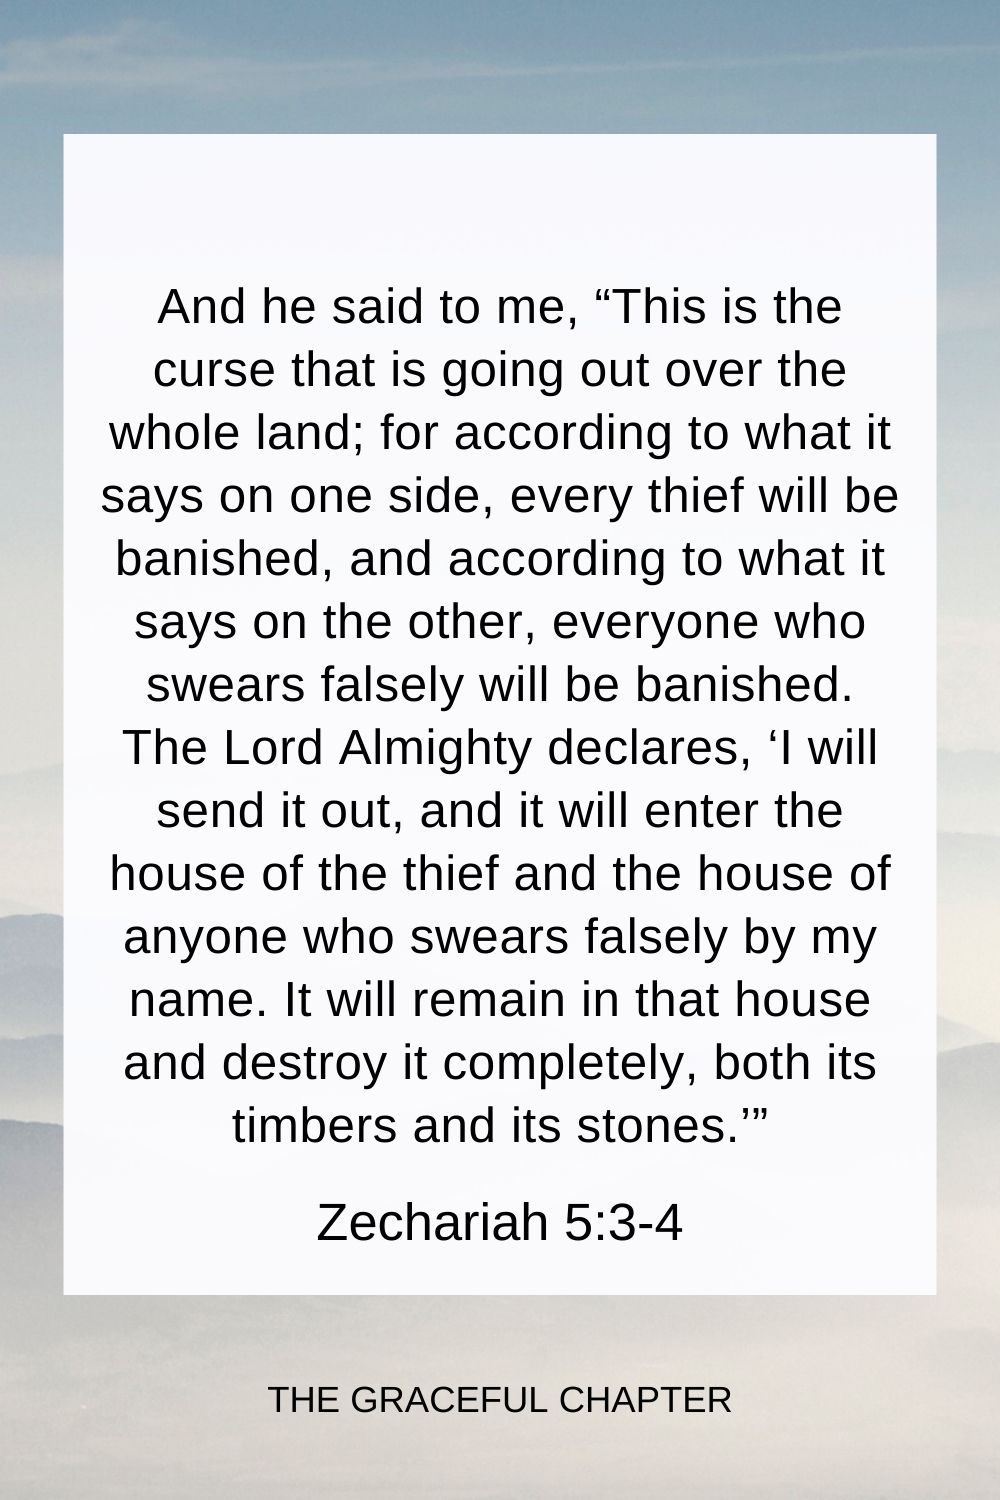 And he said to me, “This is the curse that is going out over the whole land; for according to what it says on one side, every thief will be banished, and according to what it says on the other, everyone who swears falsely will be banished.  The Lord Almighty declares, ‘I will send it out, and it will enter the house of the thief and the house of anyone who swears falsely by my name. It will remain in that house and destroy it completely, both its timbers and its stones.’” Zechariah 5:3-4